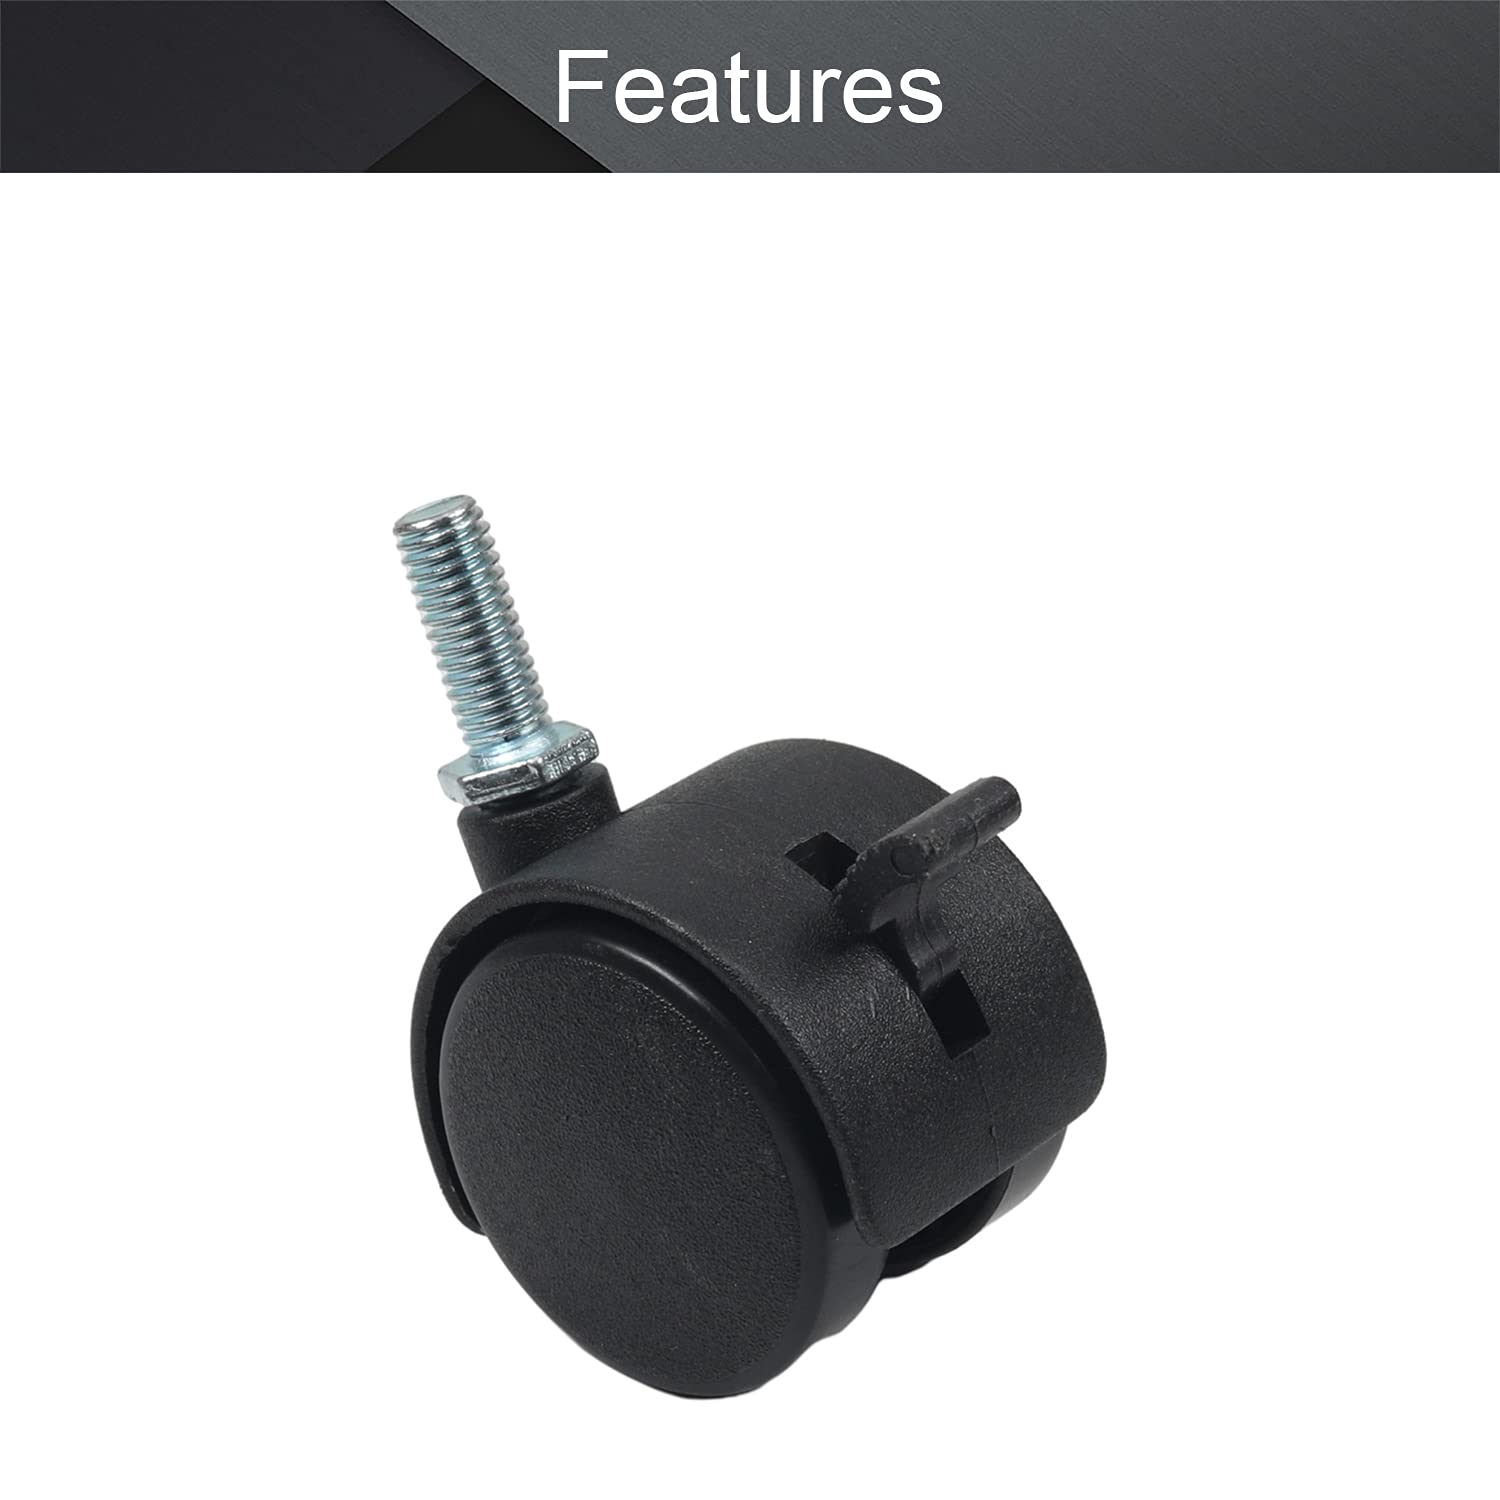 Caster Furniture，Rubbered Trolley Wheels ， Castor Wheels,Furniture Casters,M8 Threaded Stem 40mm Dual Wheel Rotatable Caster Black